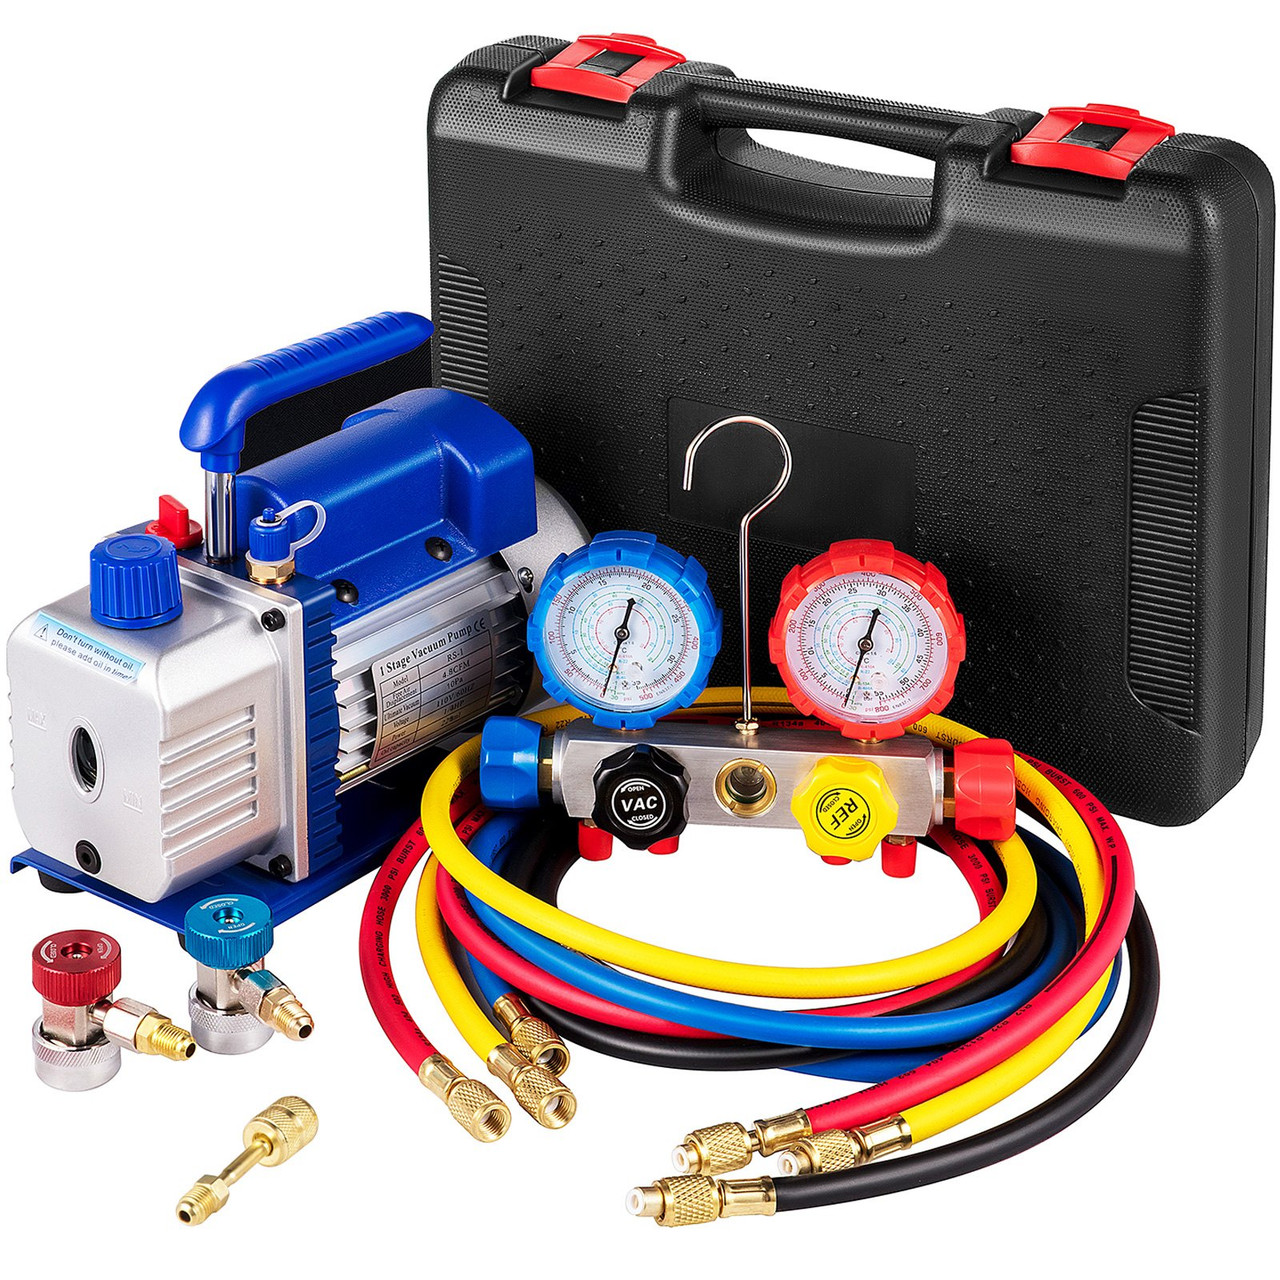 Vacuum Pump 4.8CFM 1/4 HP Single Stage HVAC A/C Refrigeration Kit 5PA Ultimate Vacuum Manifold Gauge Set R410A R134A R22 HVAC AC, 4-Way Manifold Gauge and Hose for Air Conditioning Systems